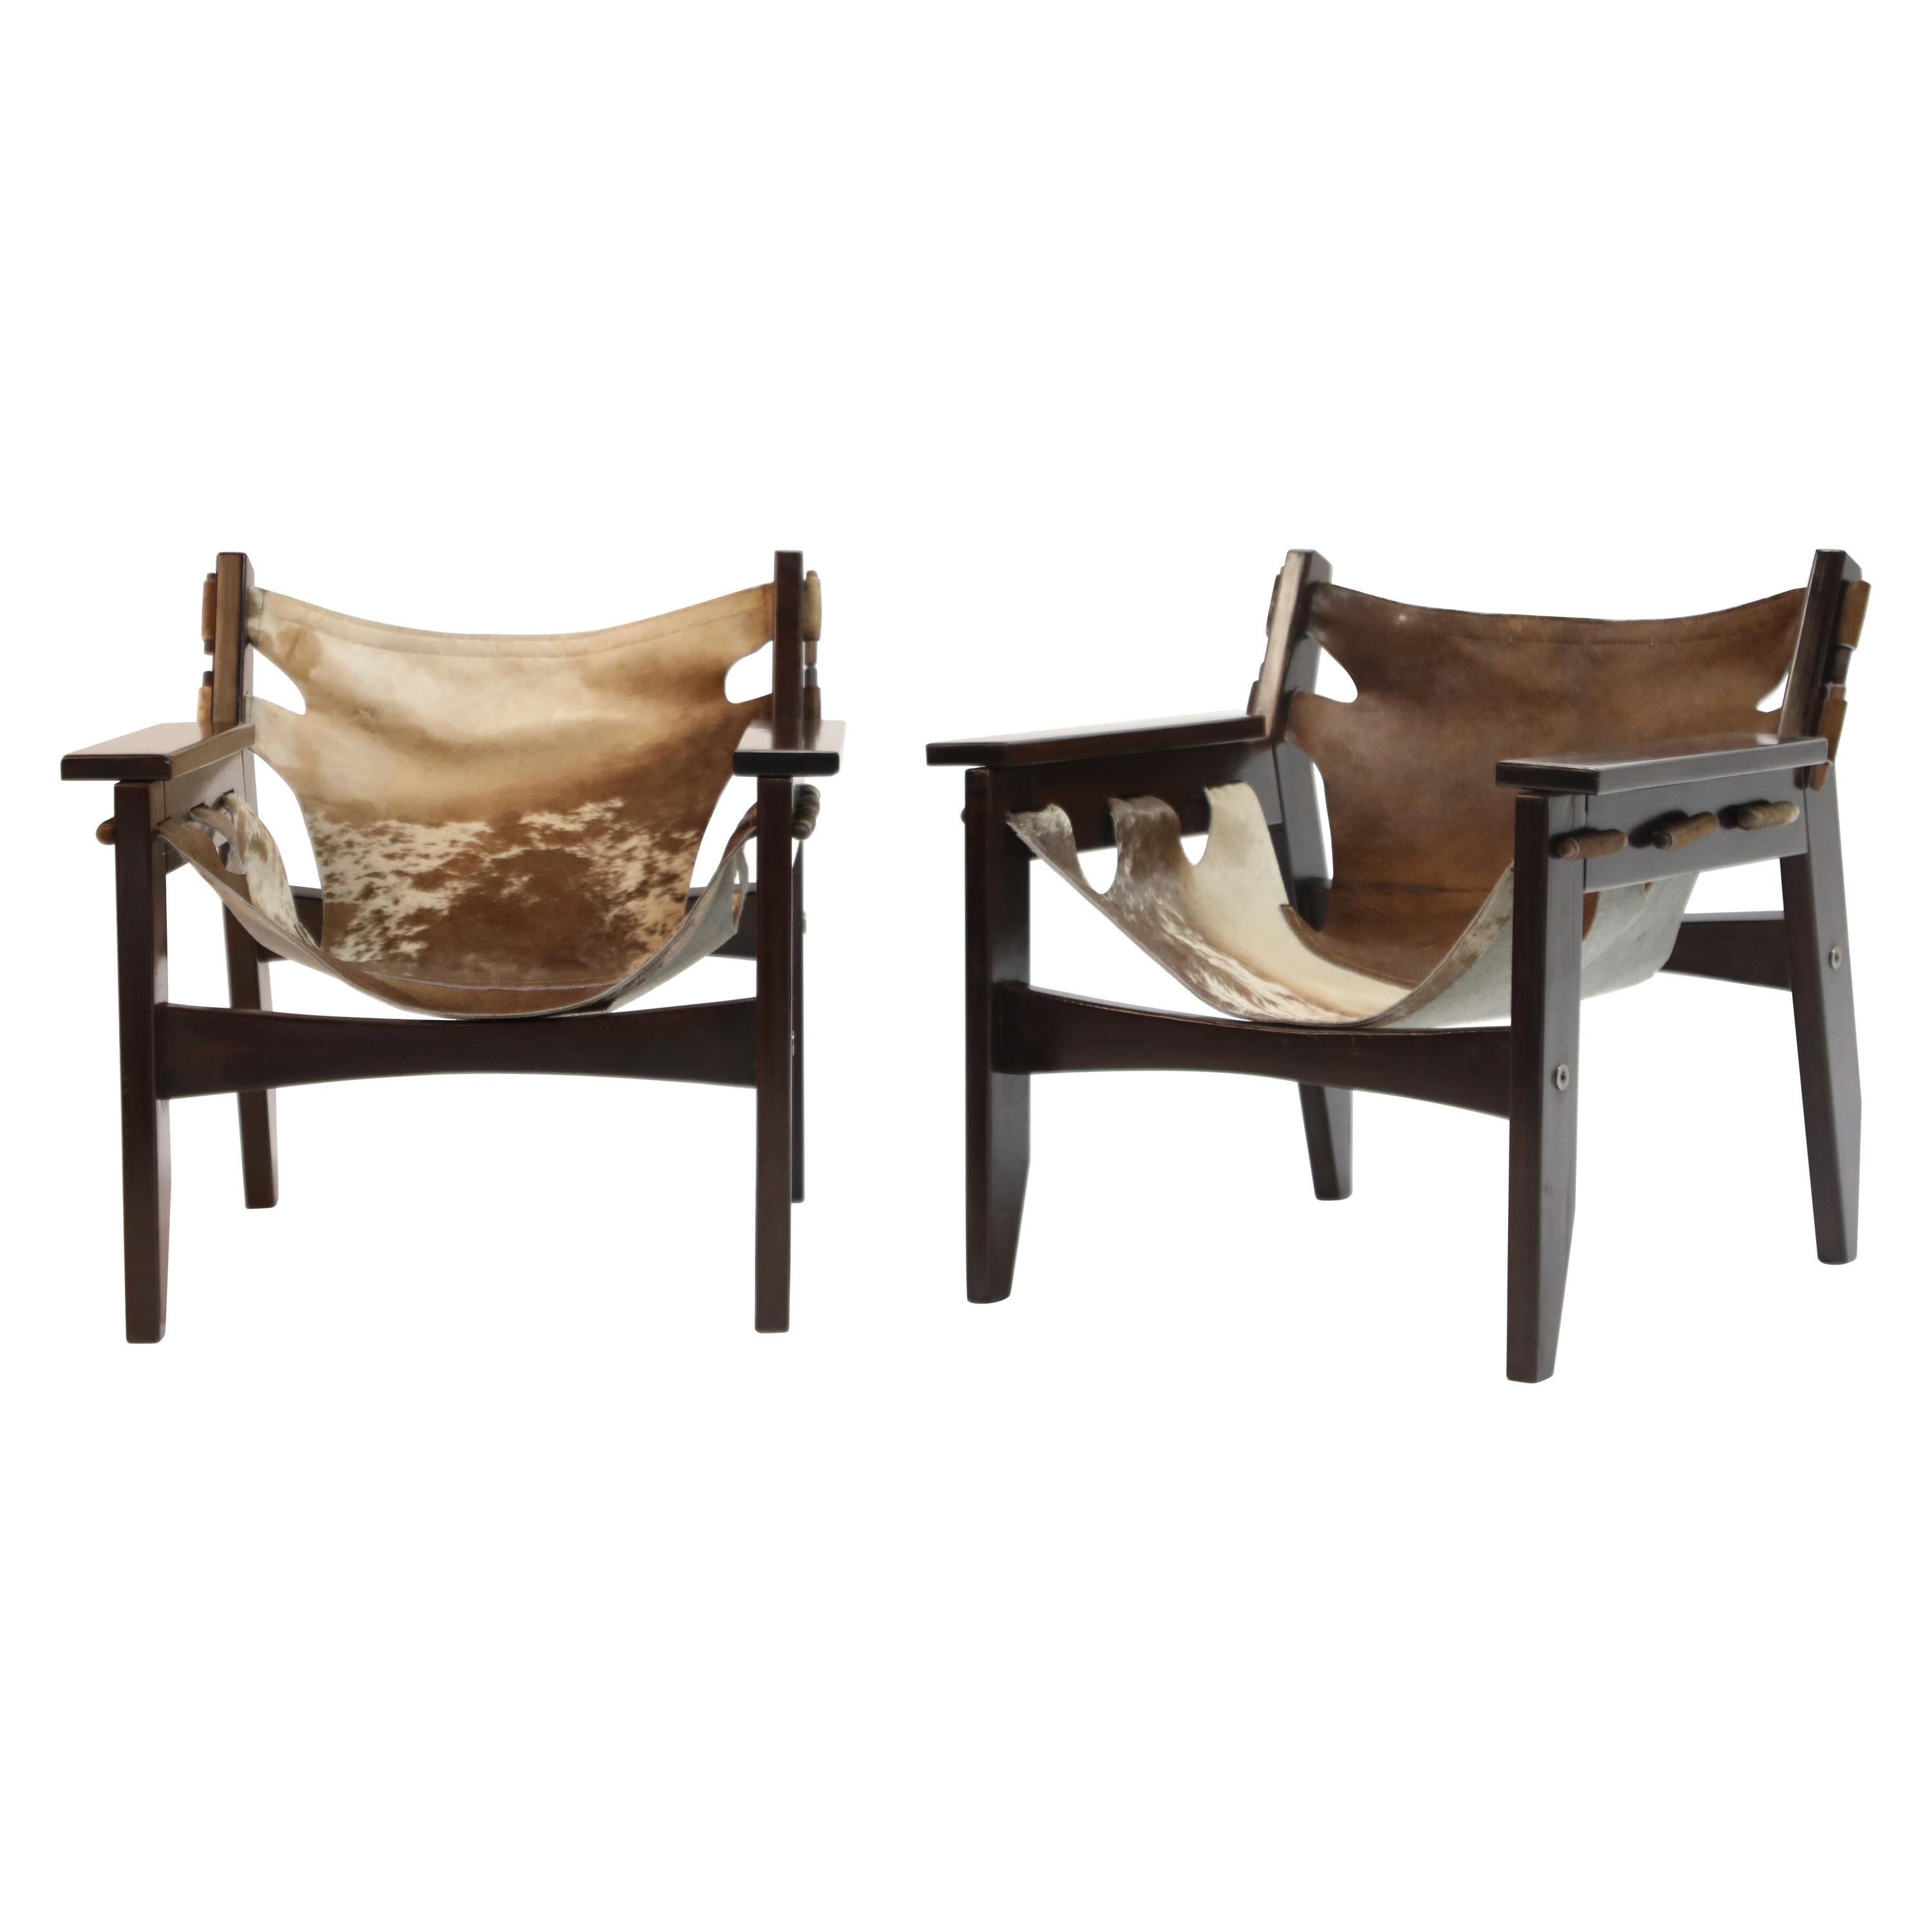 Pair of Sergio Rodrigues Kilin Chairs in Rosewood and Cowhide, OCA, Brazil 1970s